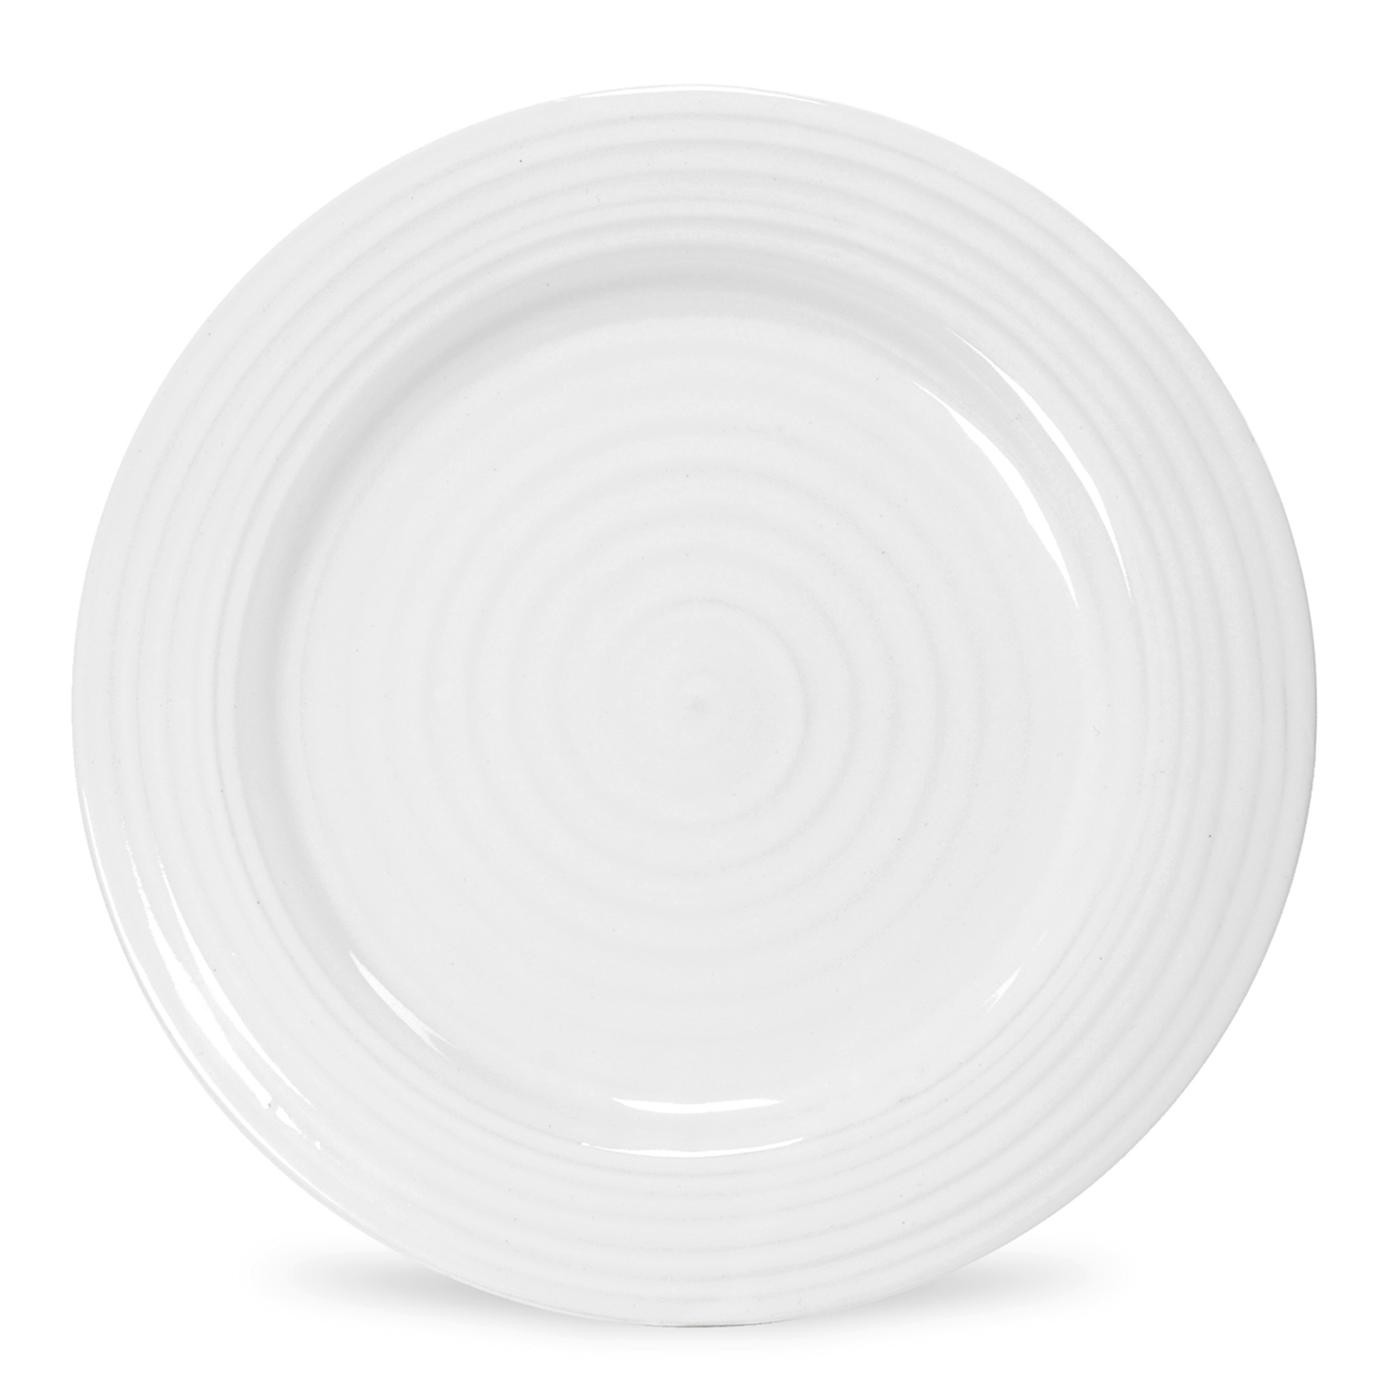 Free vector graphic: Plate, T